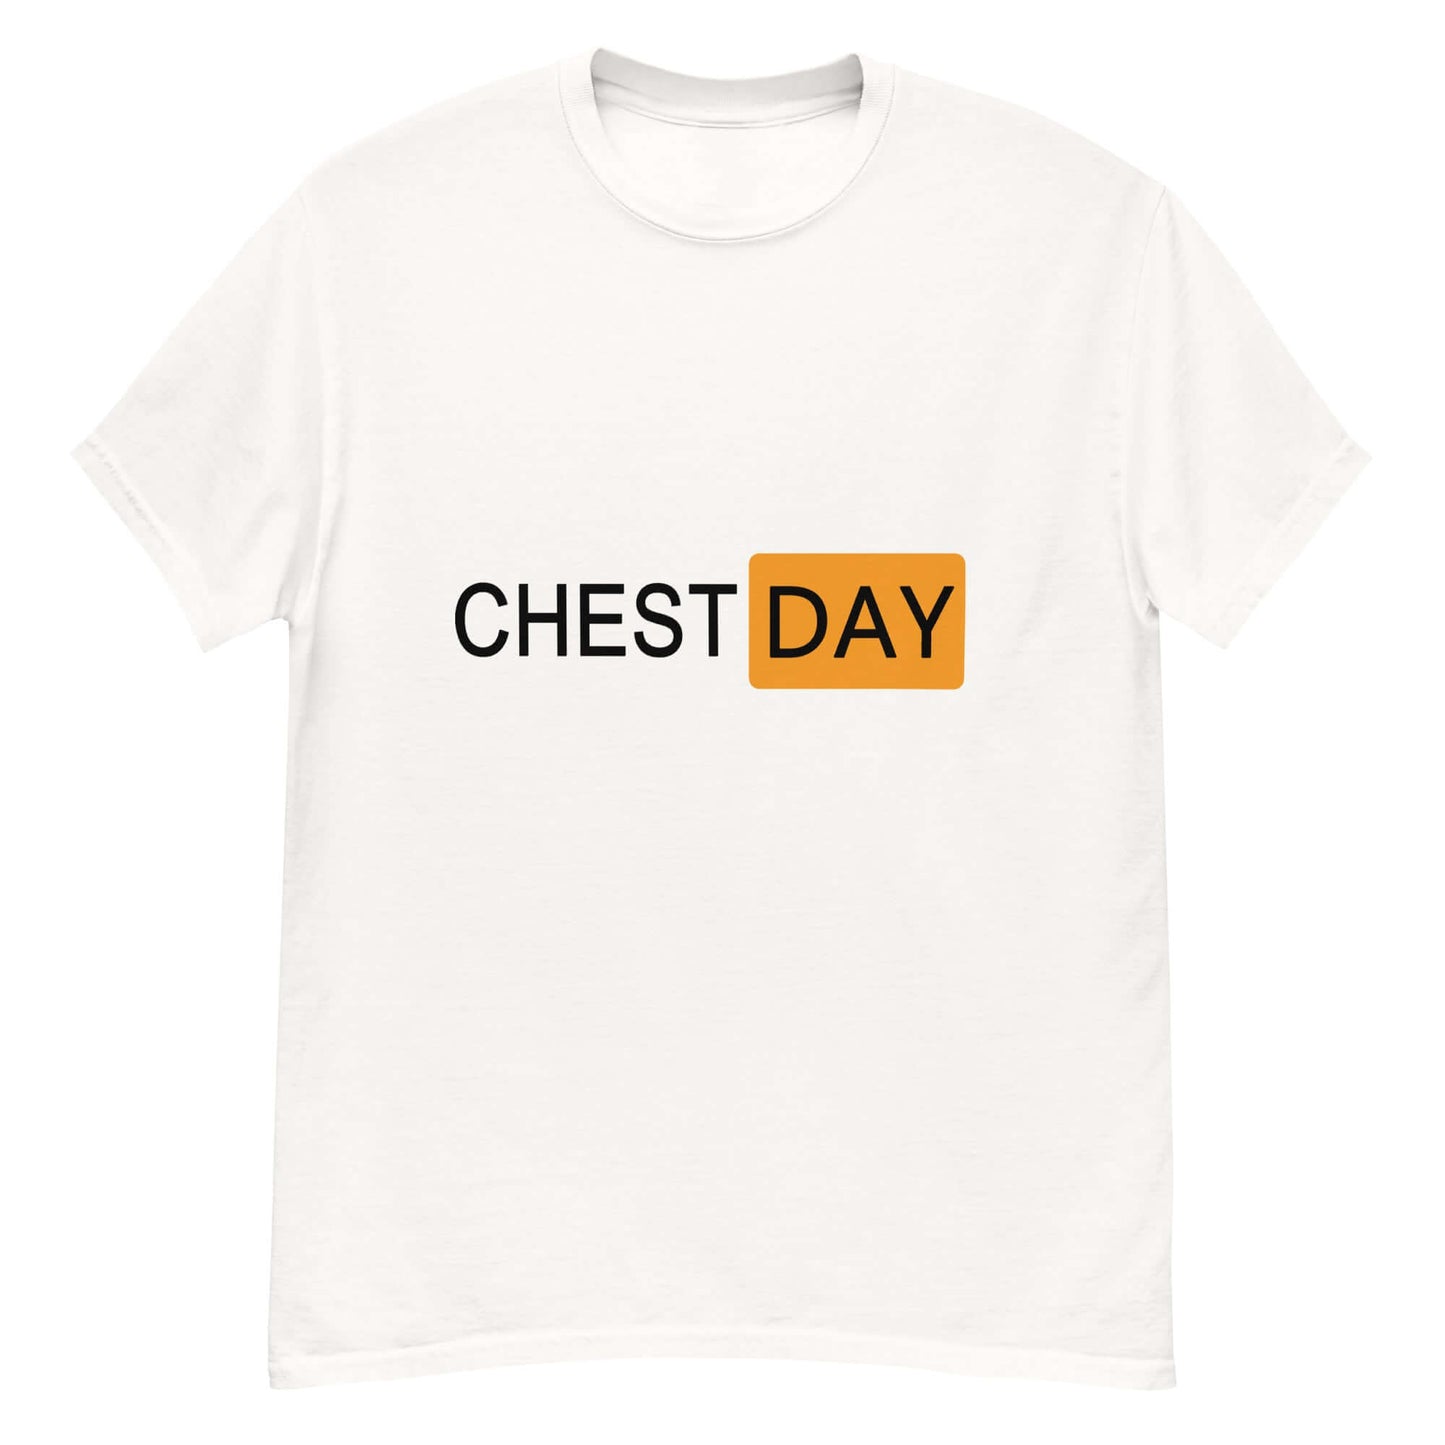 "Chest day" - Classic T-Shirt - GYM99